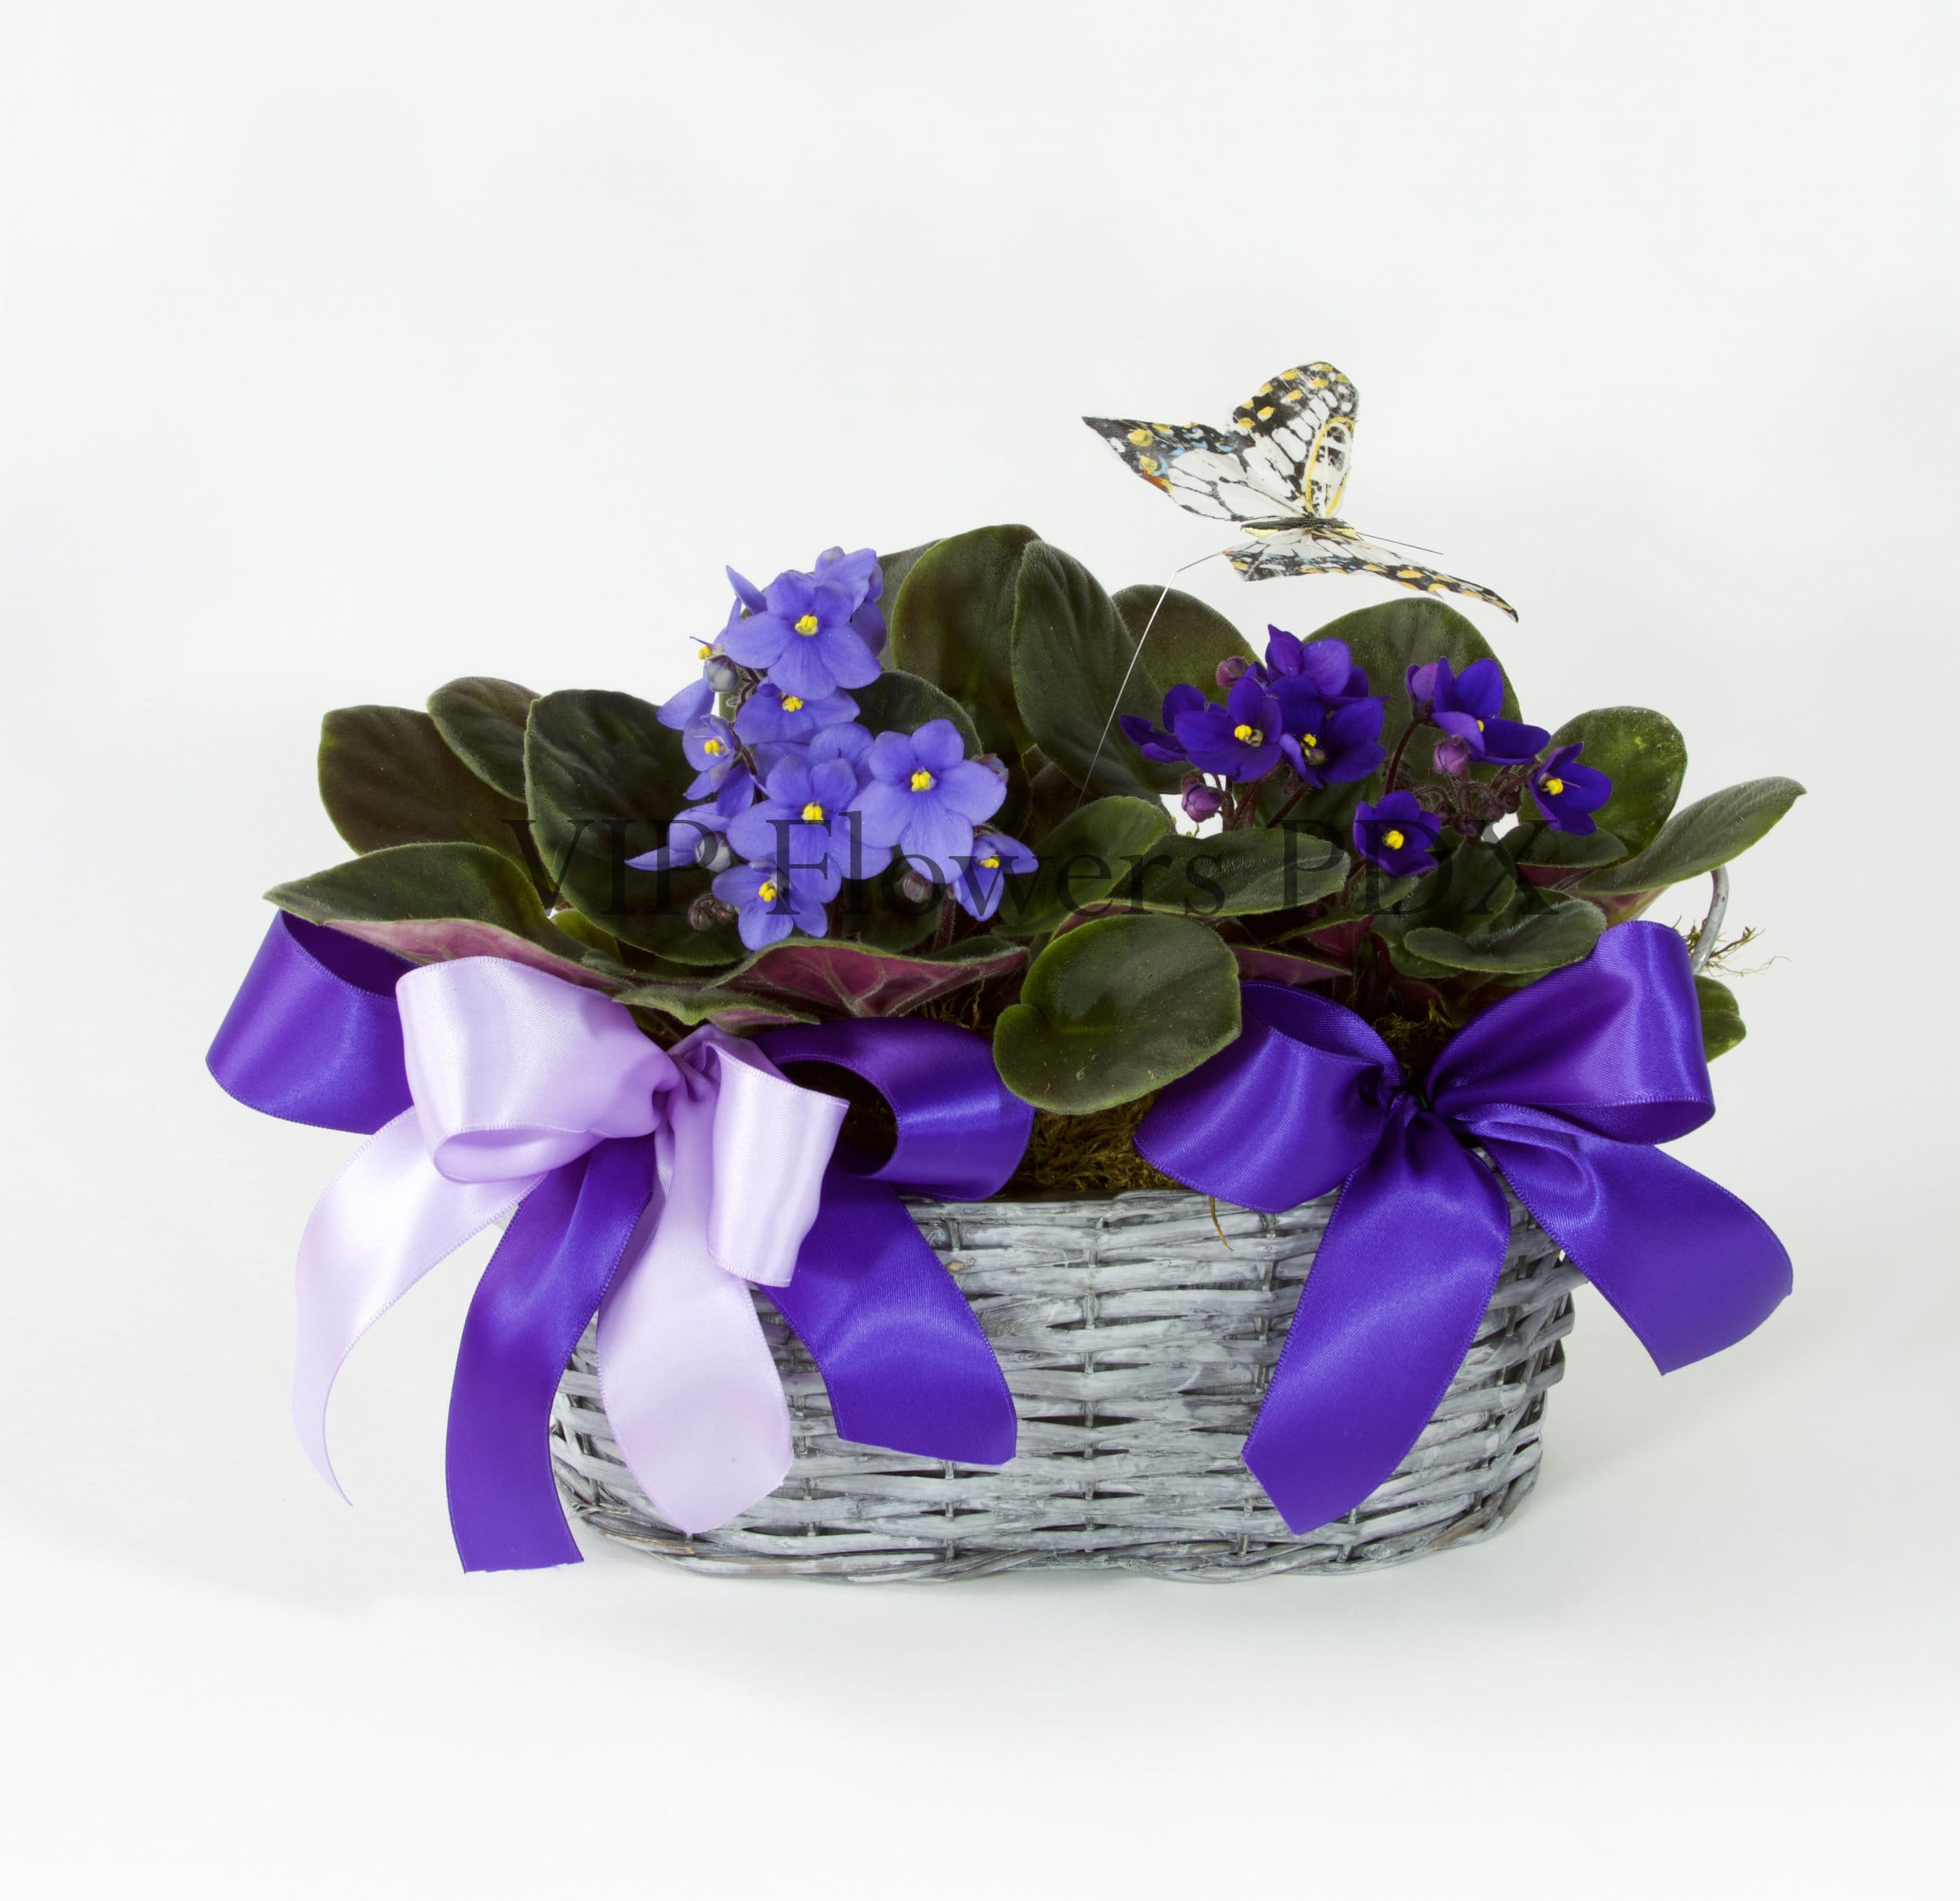 Purple Delight - Substitutions may be necessary to ensure your arrangement or specialty gift is delivered in a timely manner. The utmost care and attention is given to your order to ensure that it is as similar as possible to the requested item (Please note that some flowers and colors may vary due to seasonality.)